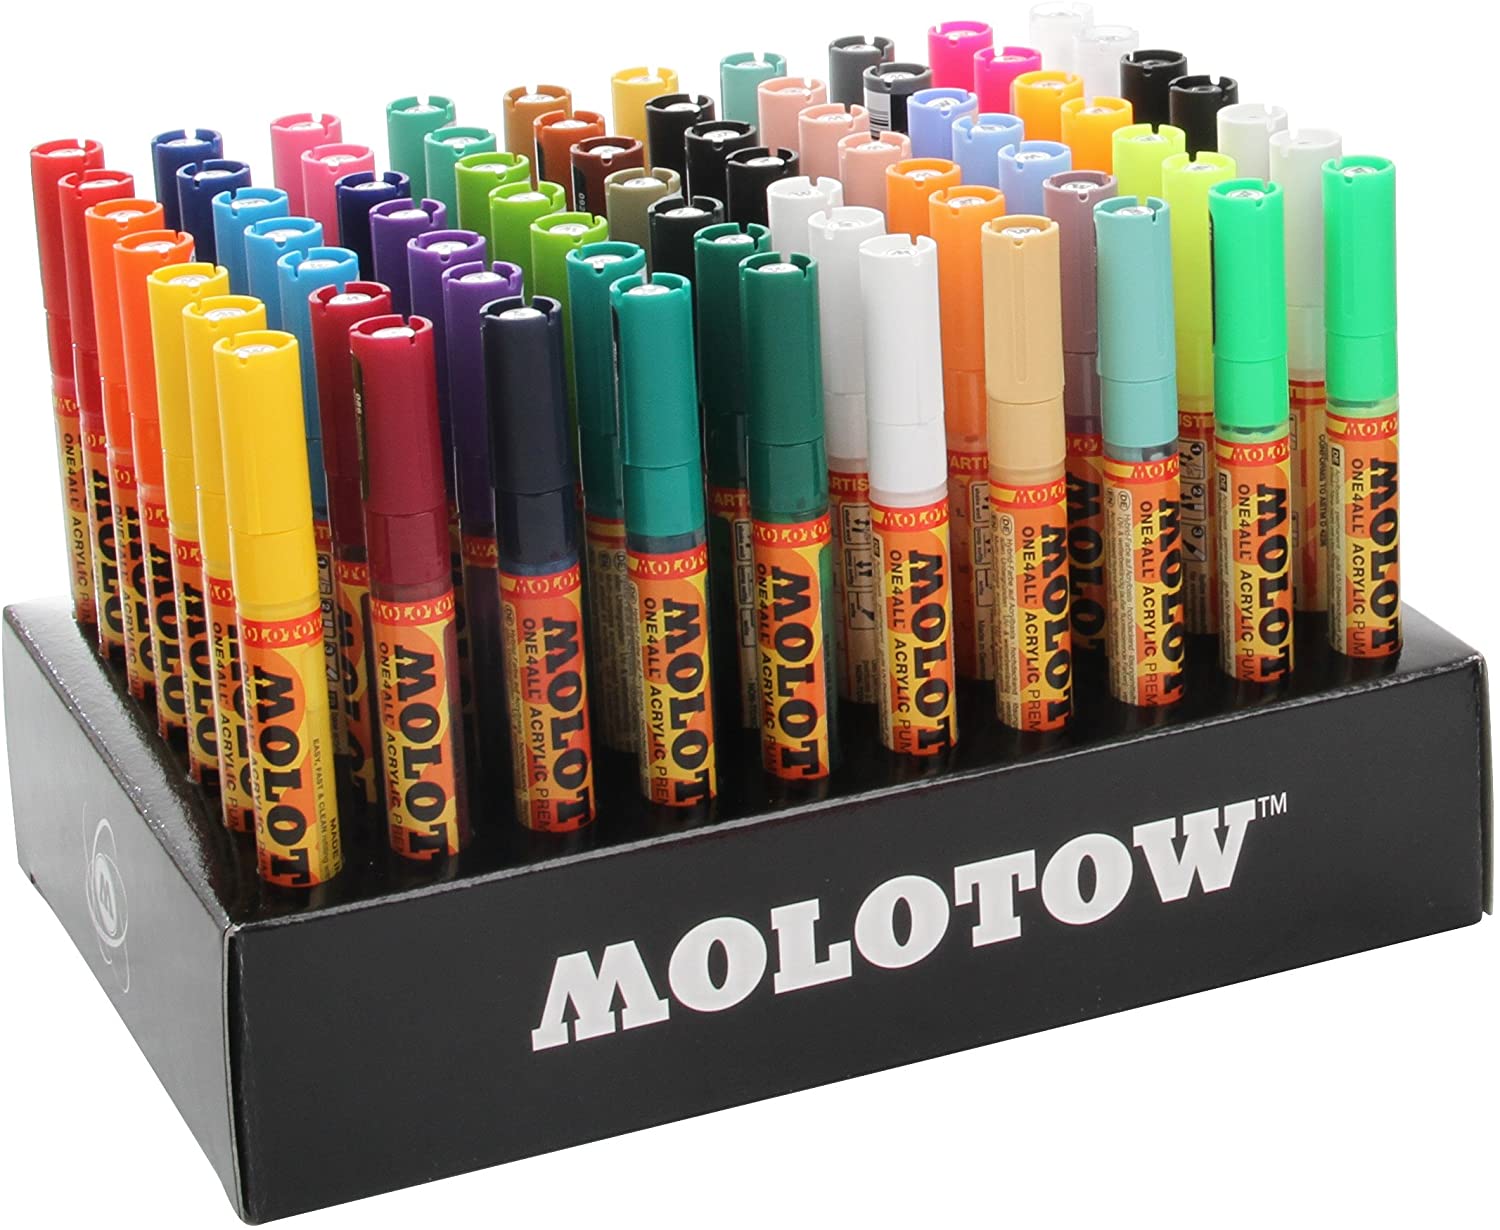 Molotow One4all Acrylic Marker 4mm